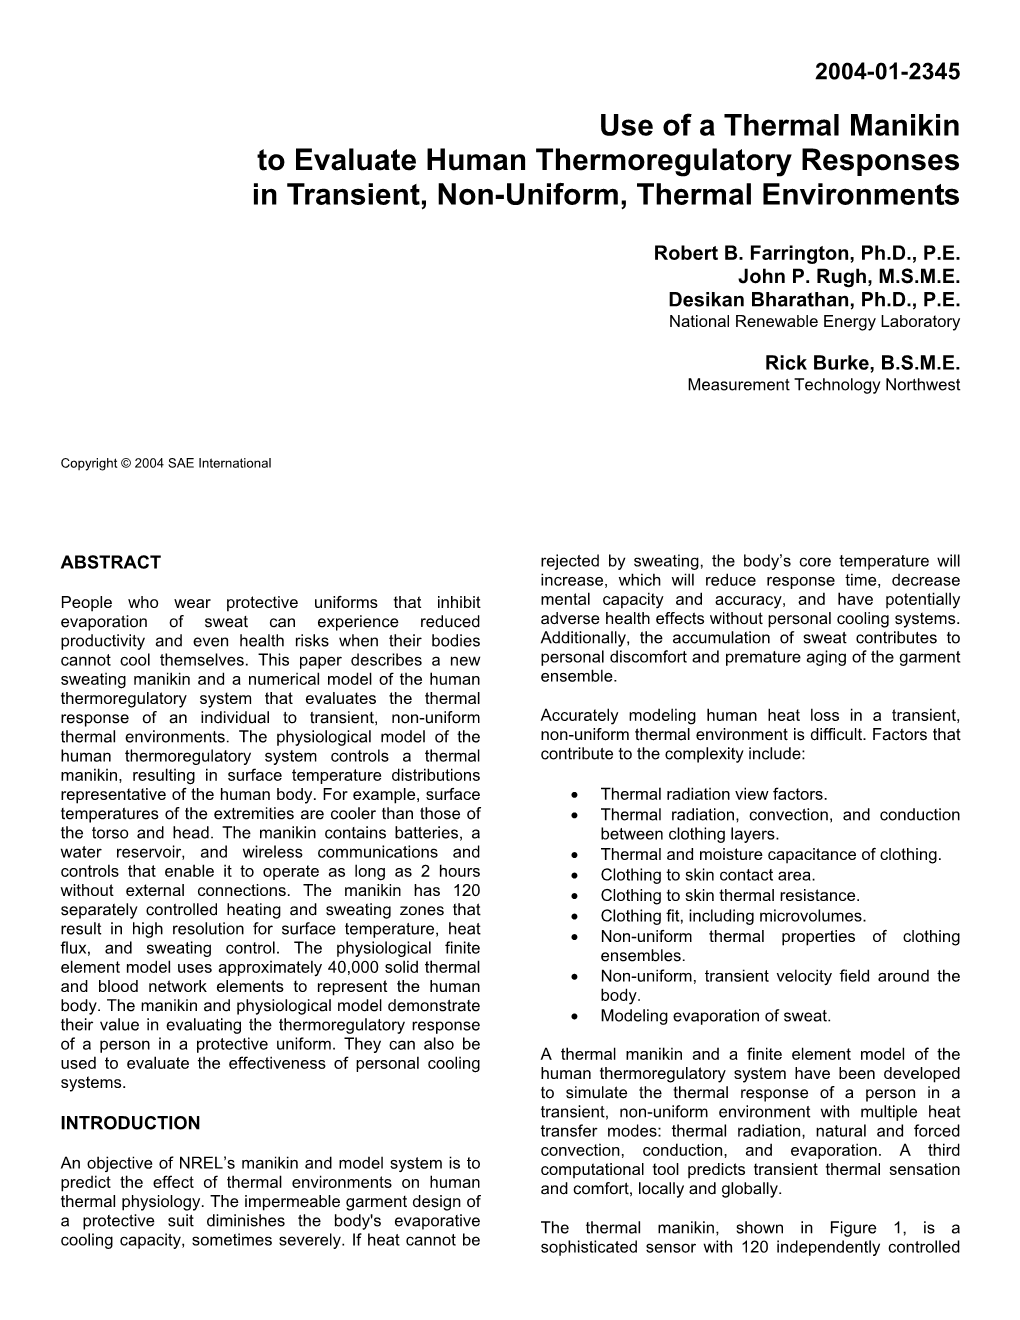 Use of a Thermal Manikin to Evaluate Human Thermoregulatory Responses in Transient, Non-Uniform, Thermal Environments